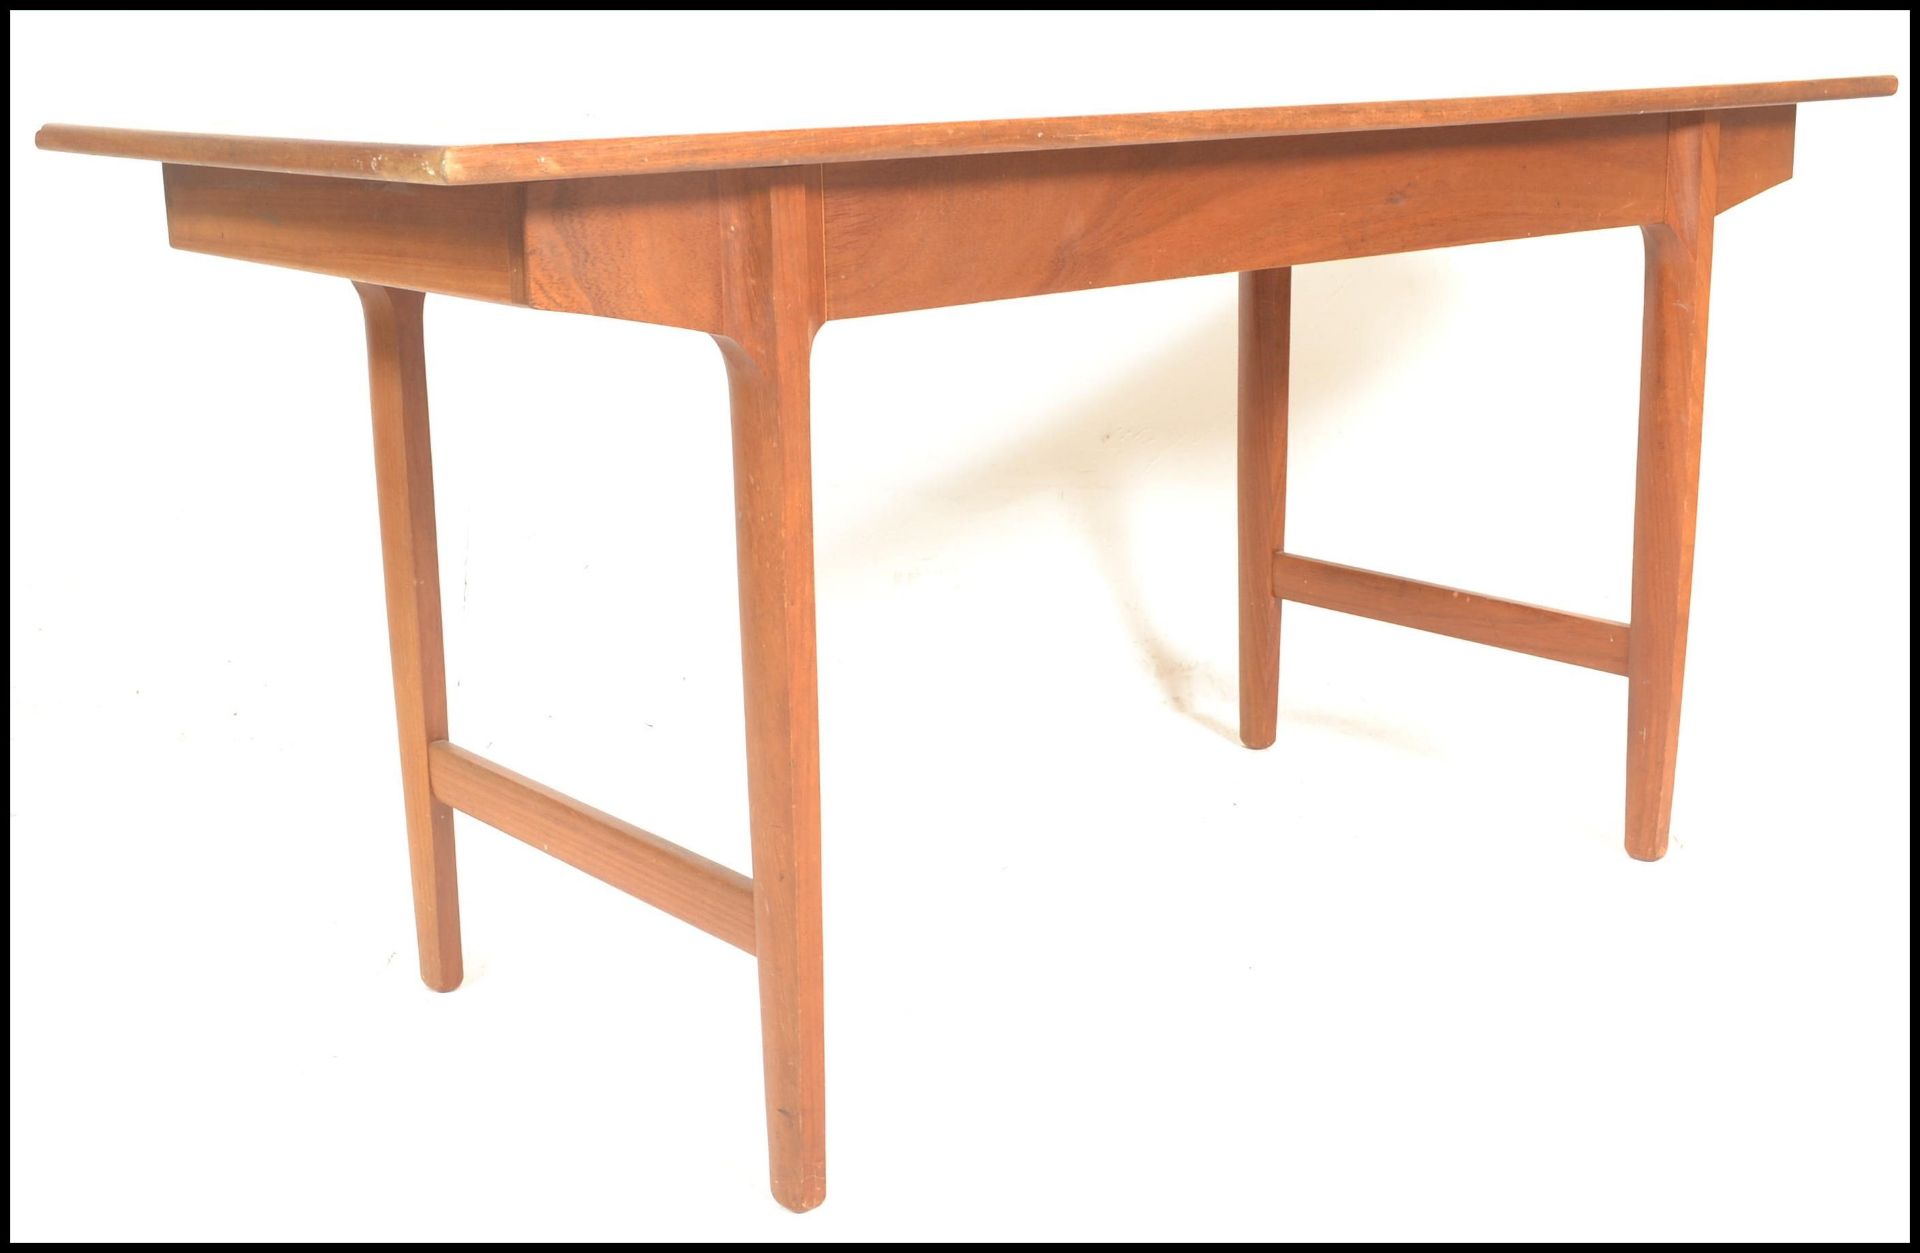 A mid century Bath Cabinet Makers teak wood Danish inspired dining table being raised on turned,